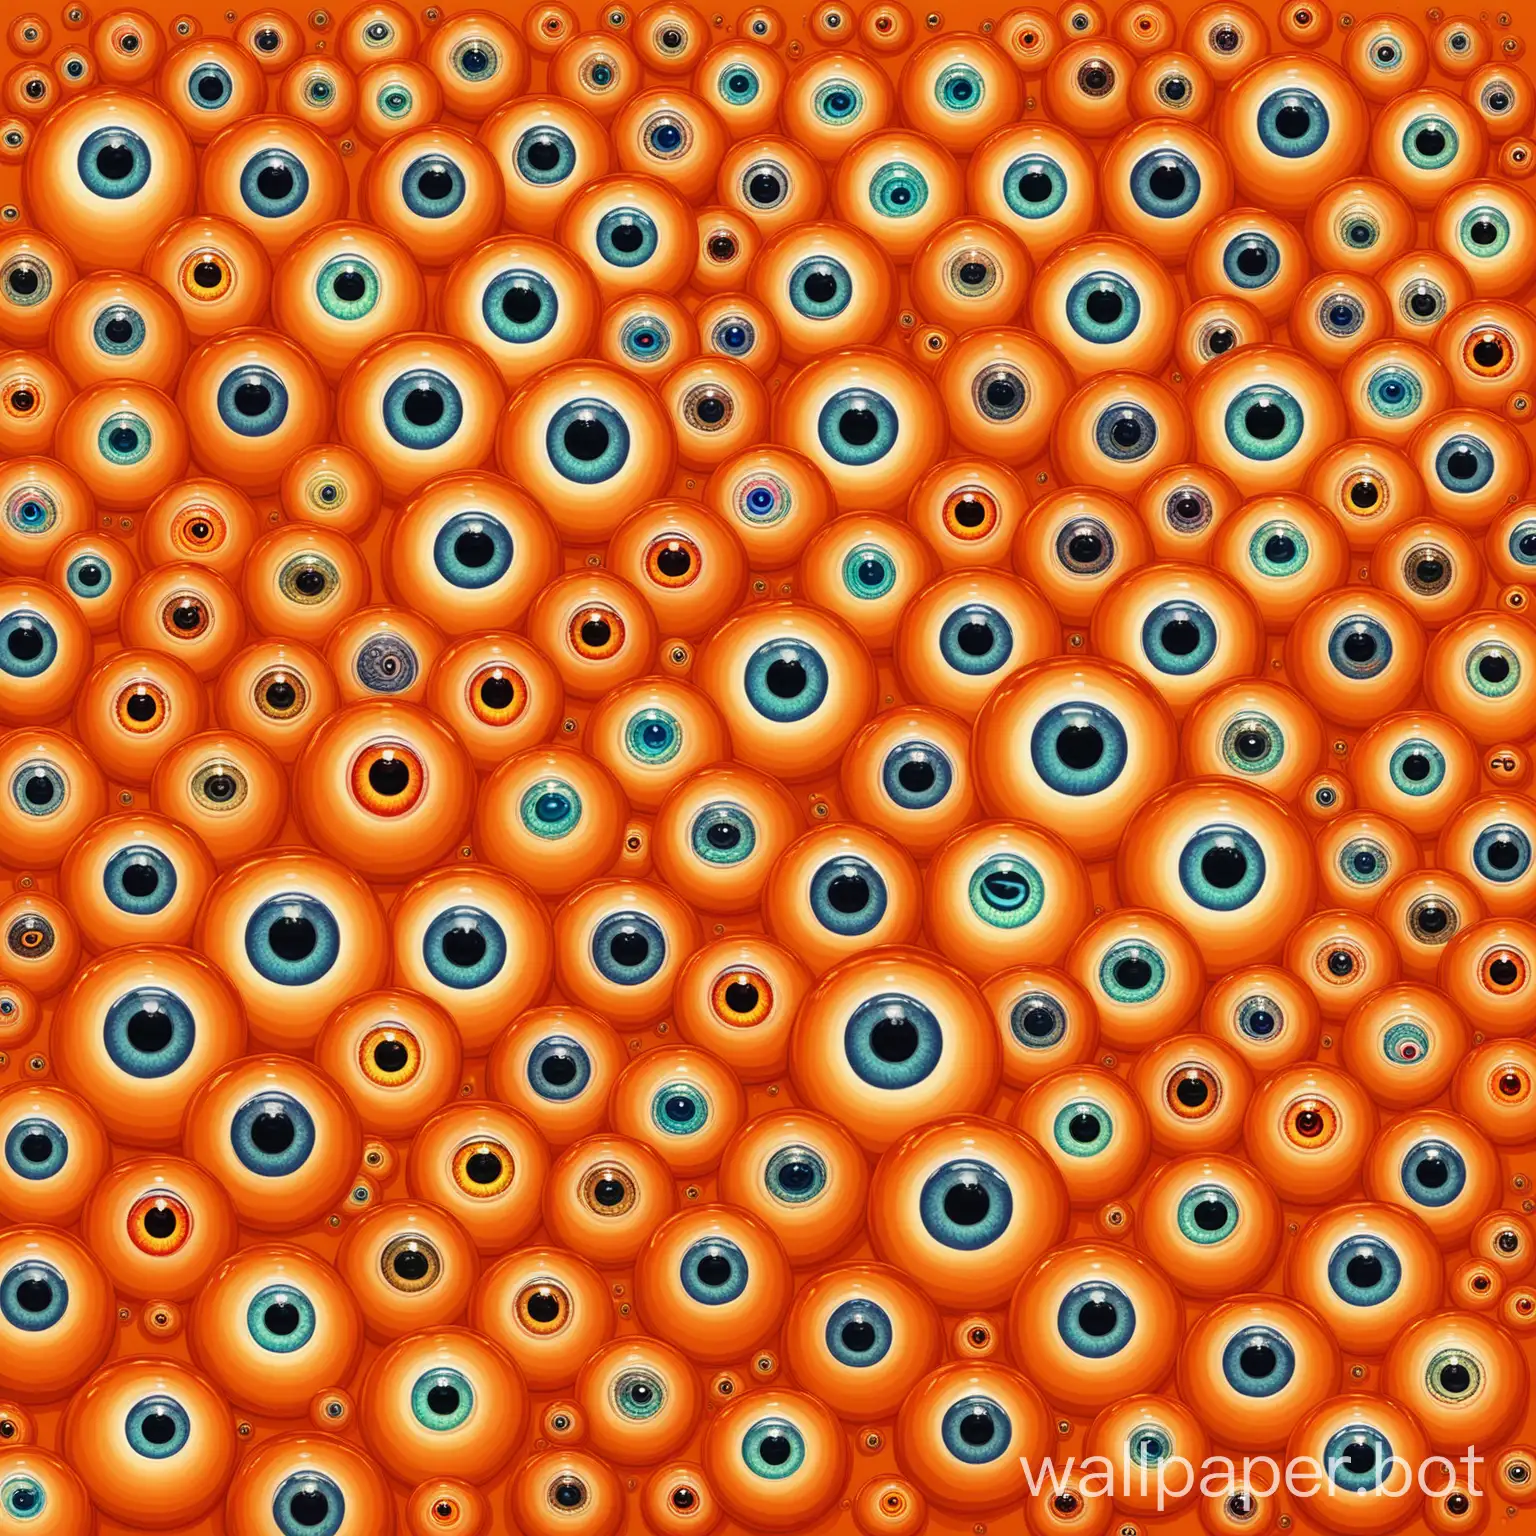 20 different eyeballs, all of them are different and can range from people and cat eyes to dragons eyes, all of them are melting, orange trippy background